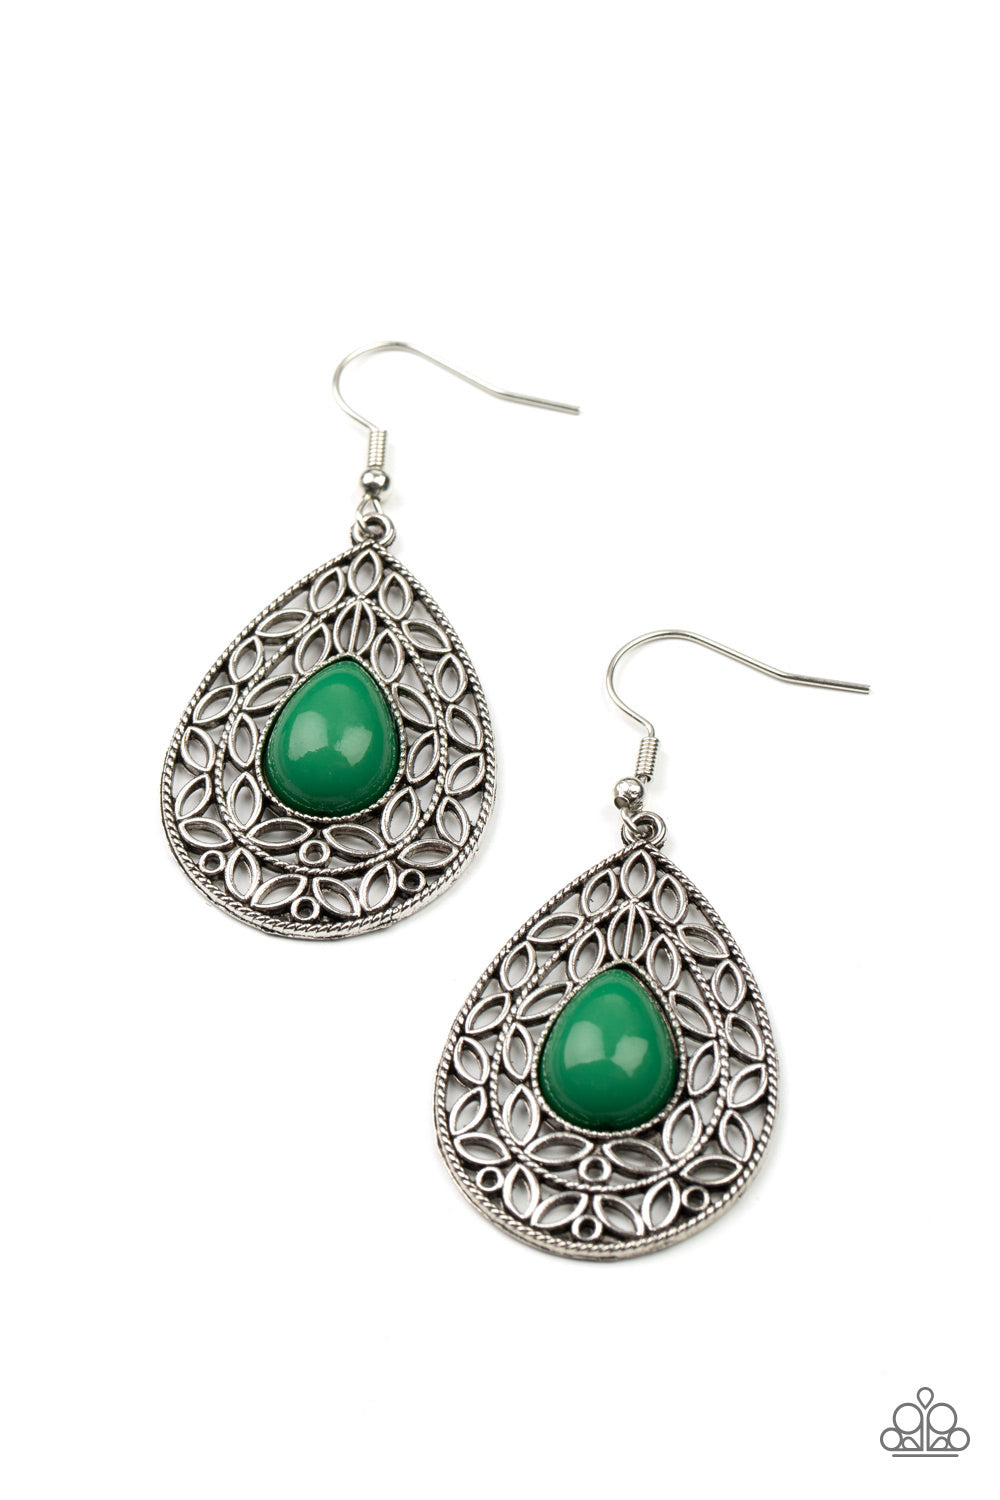 Fanciful Droplets - Green and Silver Earrings - Paparazzi Accessories - Fanciful teardrop frames filled with a charming leaf motif filigree envelop a bright Leprechaun teardrop bead creating a captivating lure. Earring attaches to a standard fishhook fitting. Sold as one pair of earrings.